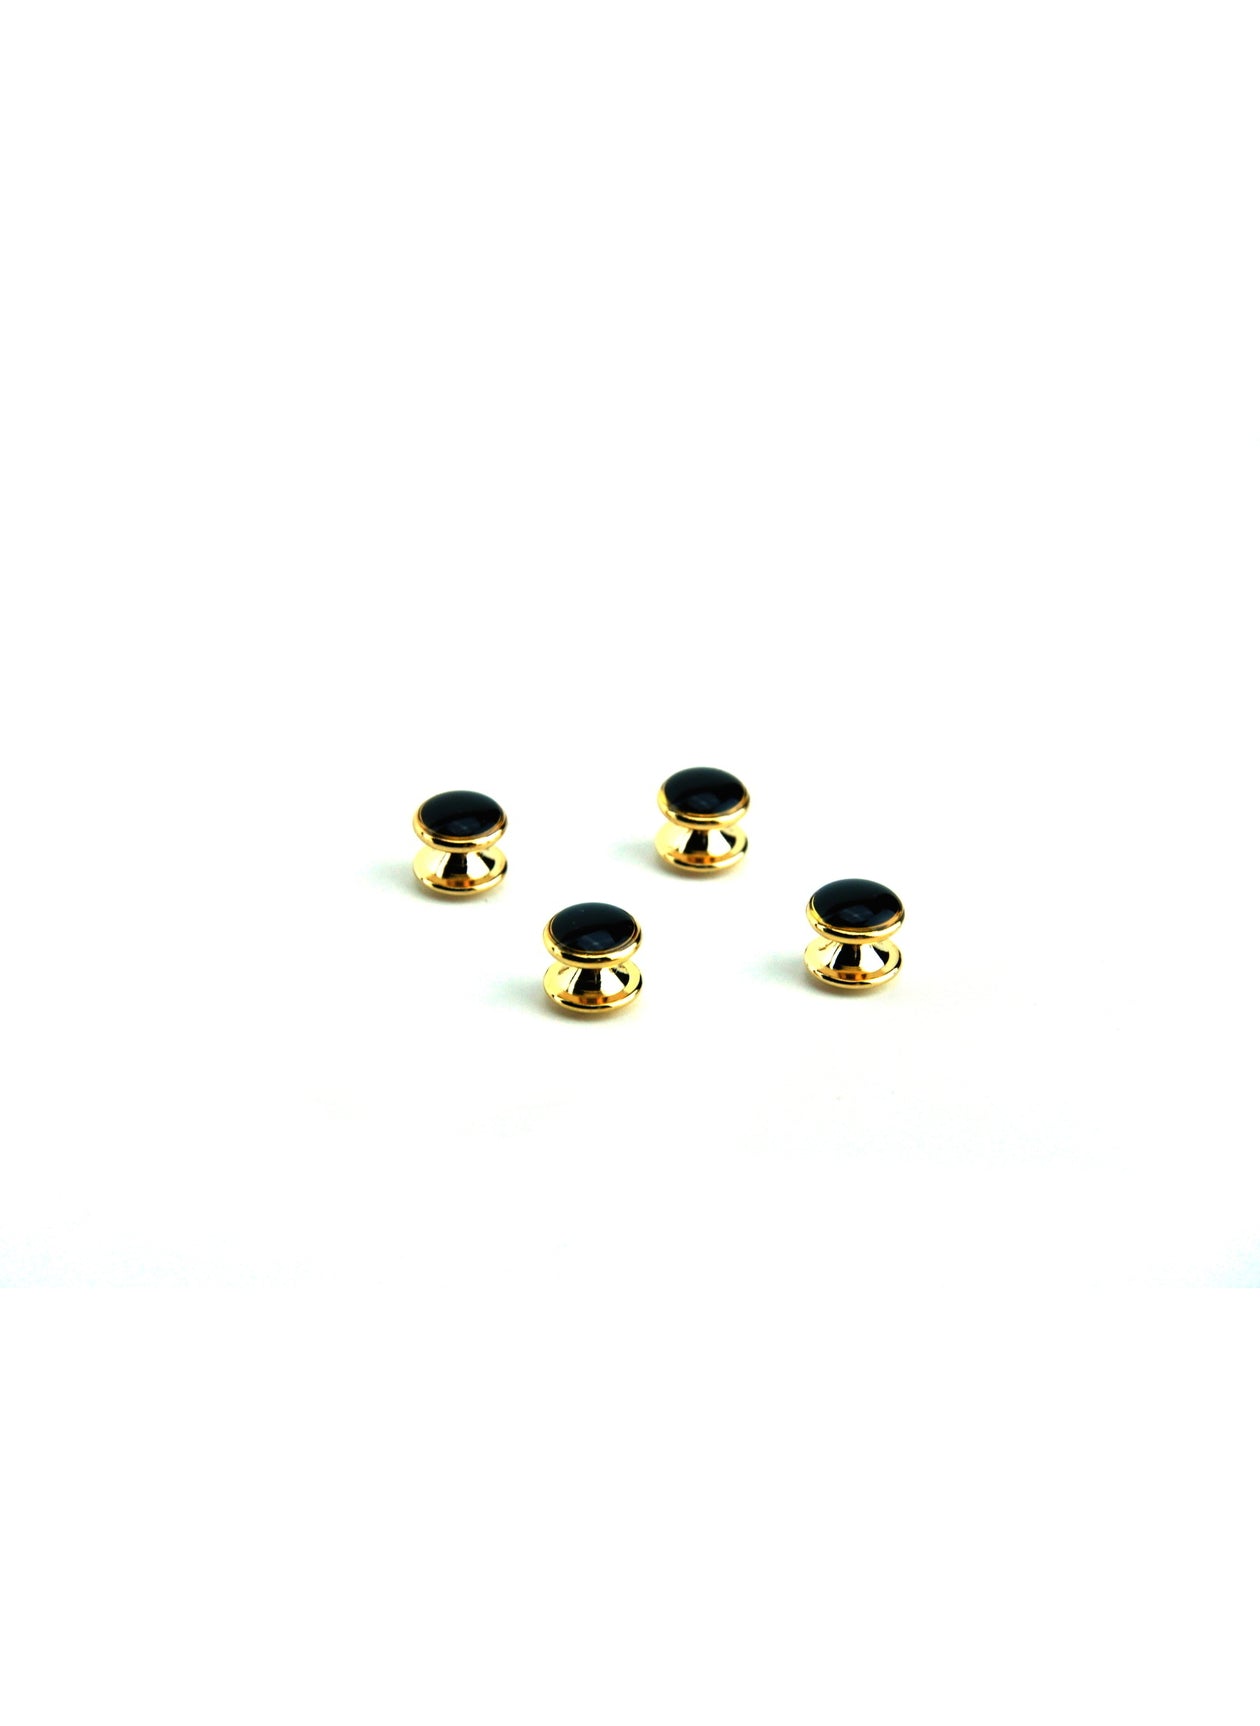 CUFF LINKS AND STUD SET - GOLD